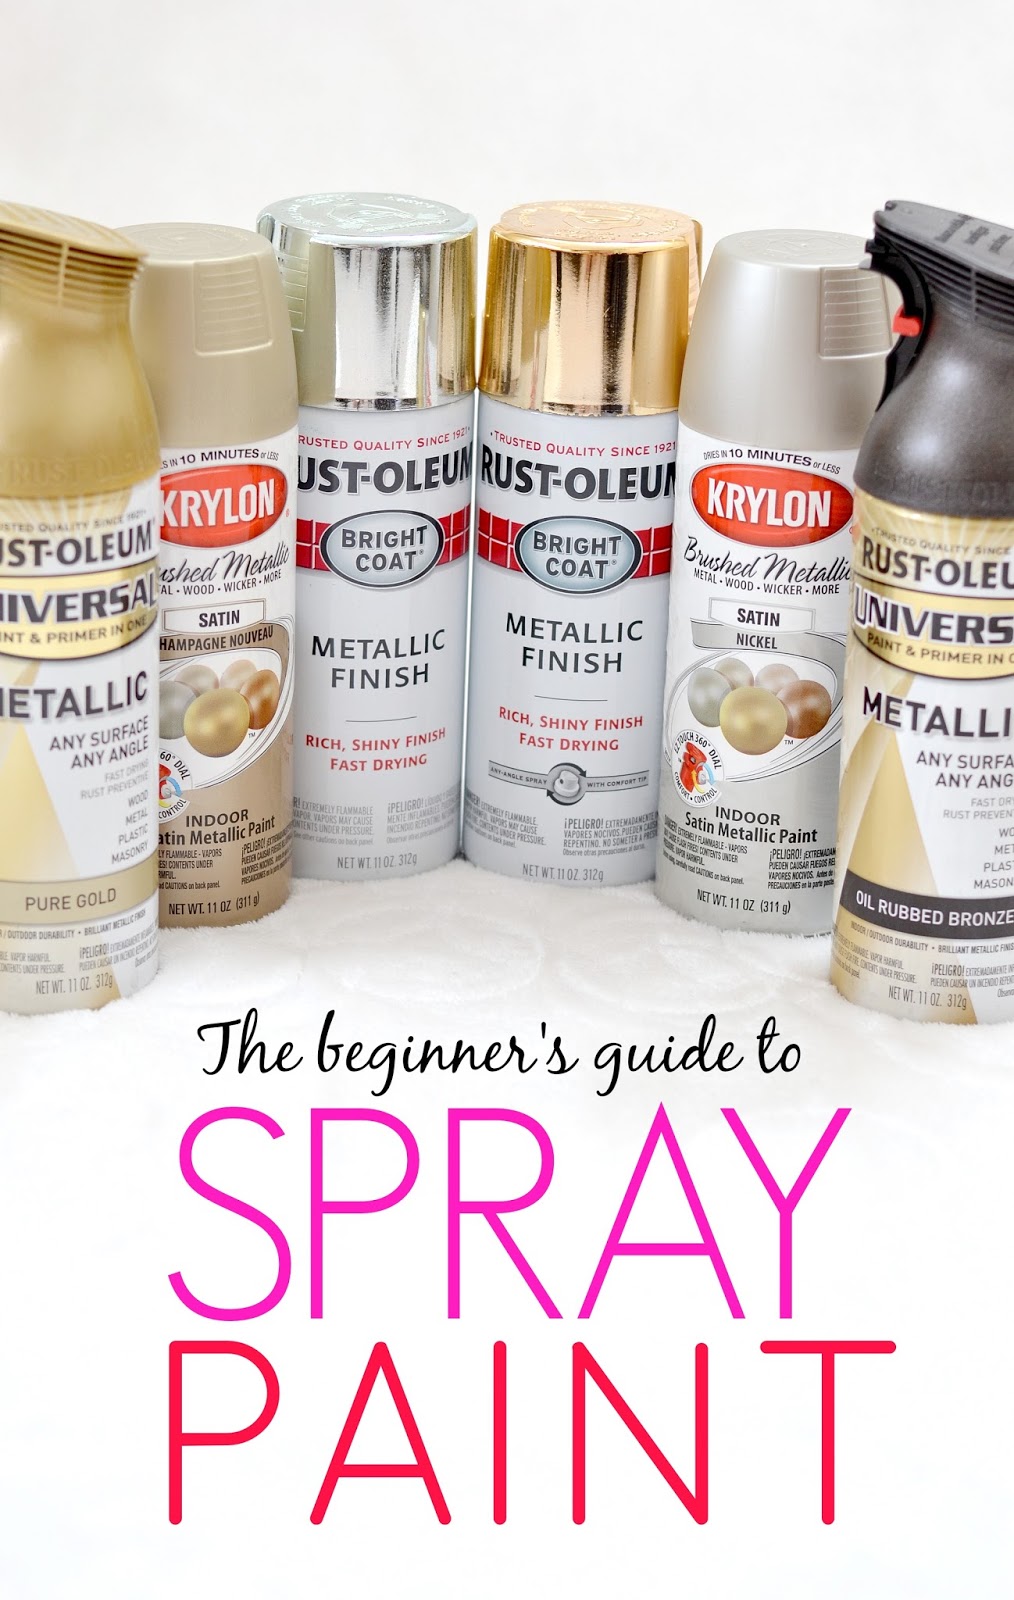 Spray Painting Tips & Tricks - Everything You Need to Know